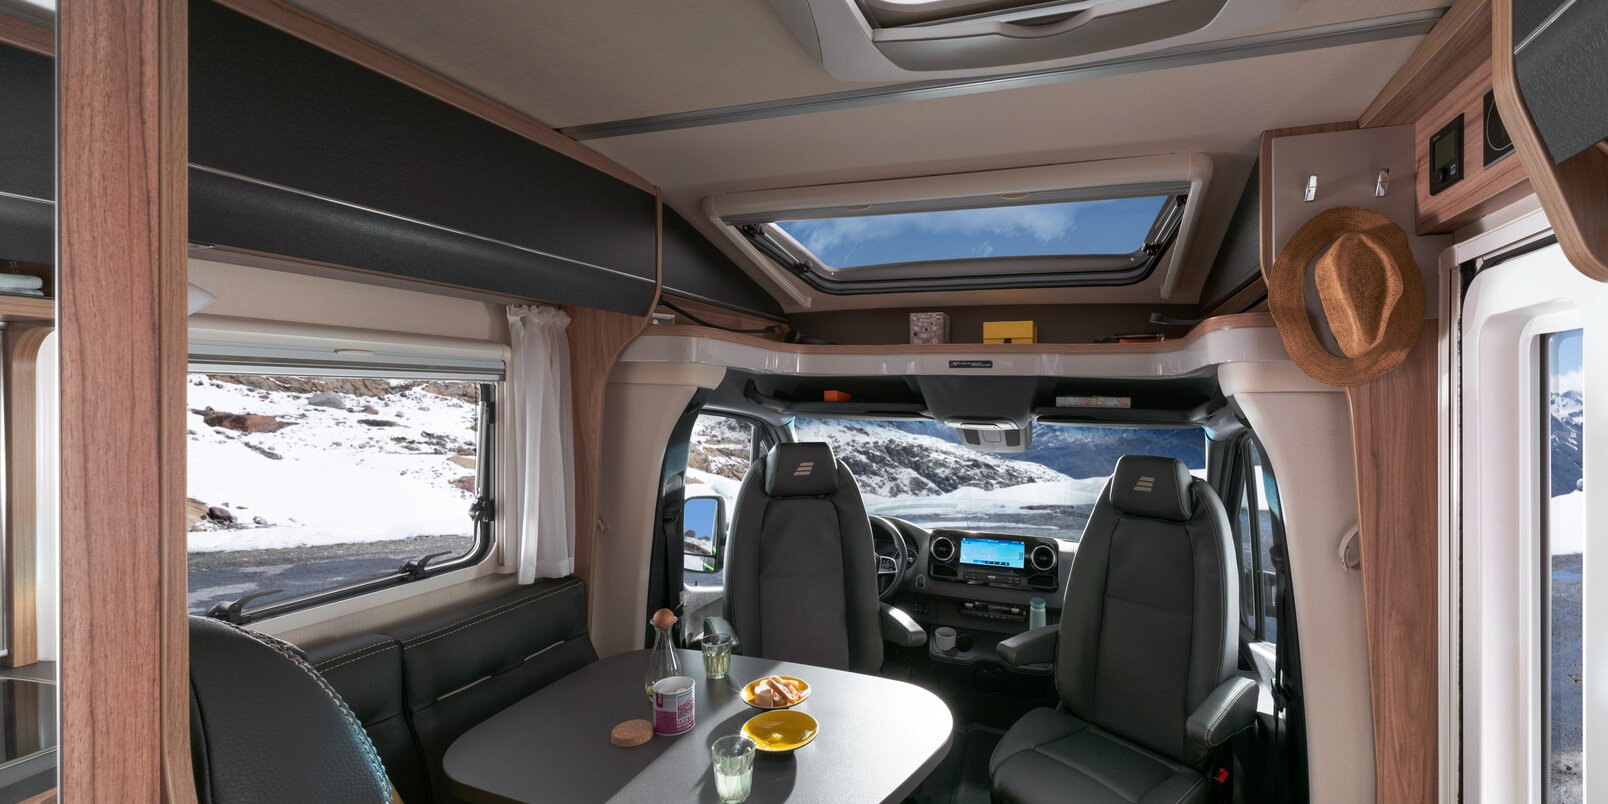 Living space in the HYMER ML-T CrossOver: dark leather seating area, laid table, panoramic roof vent, driver's seats and driver's cab